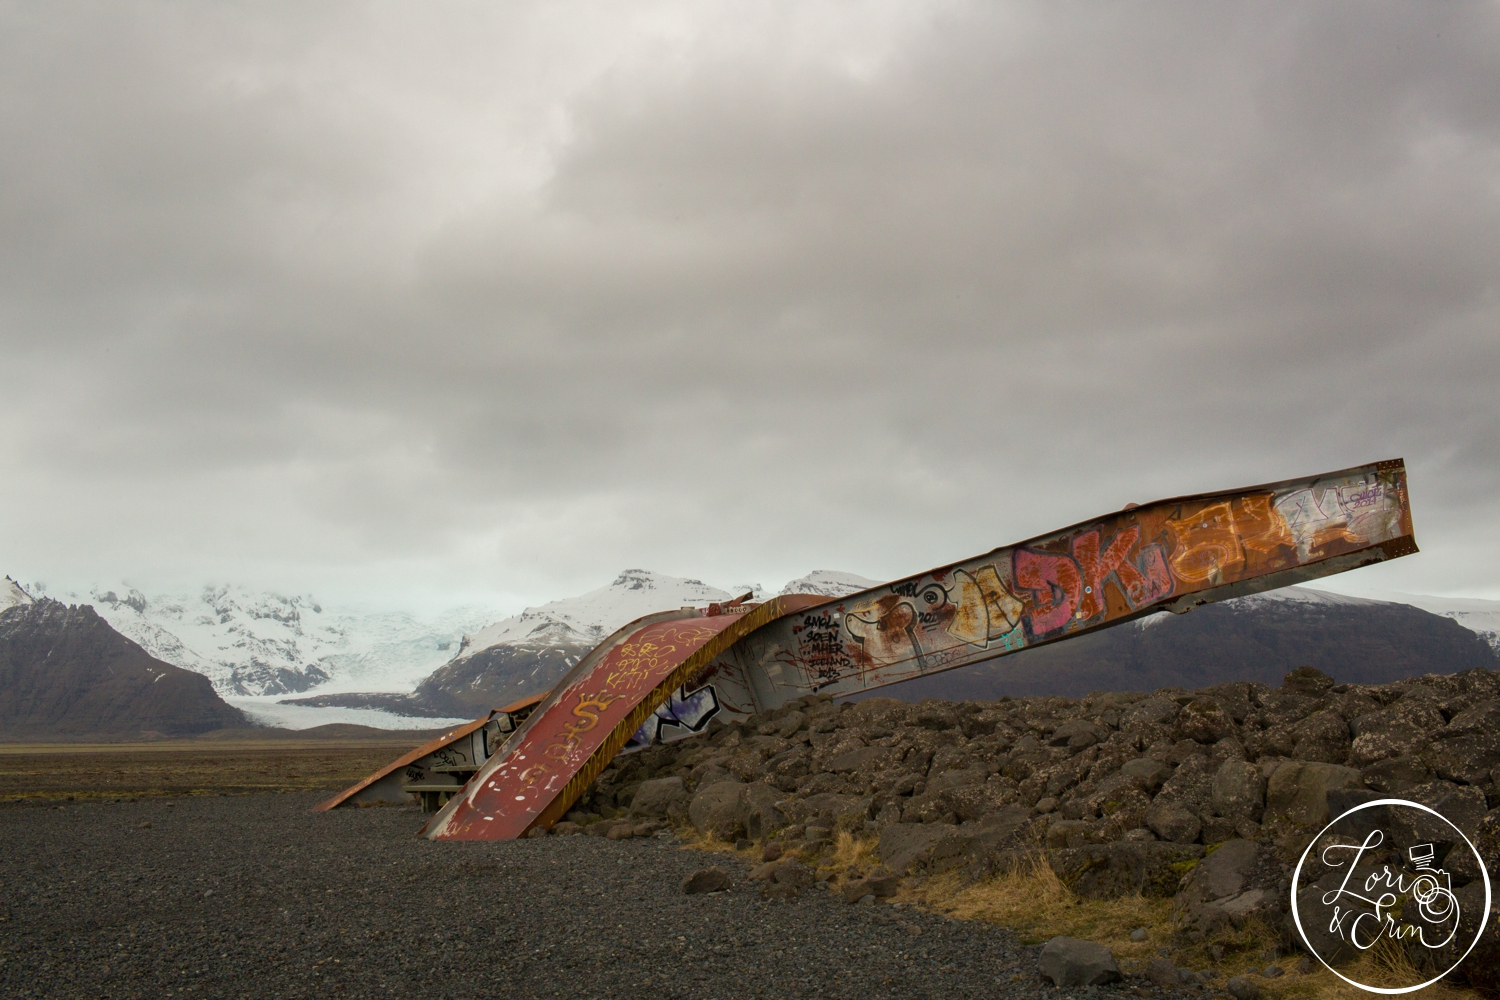  Remnants of a bridge with a glacier in the background 